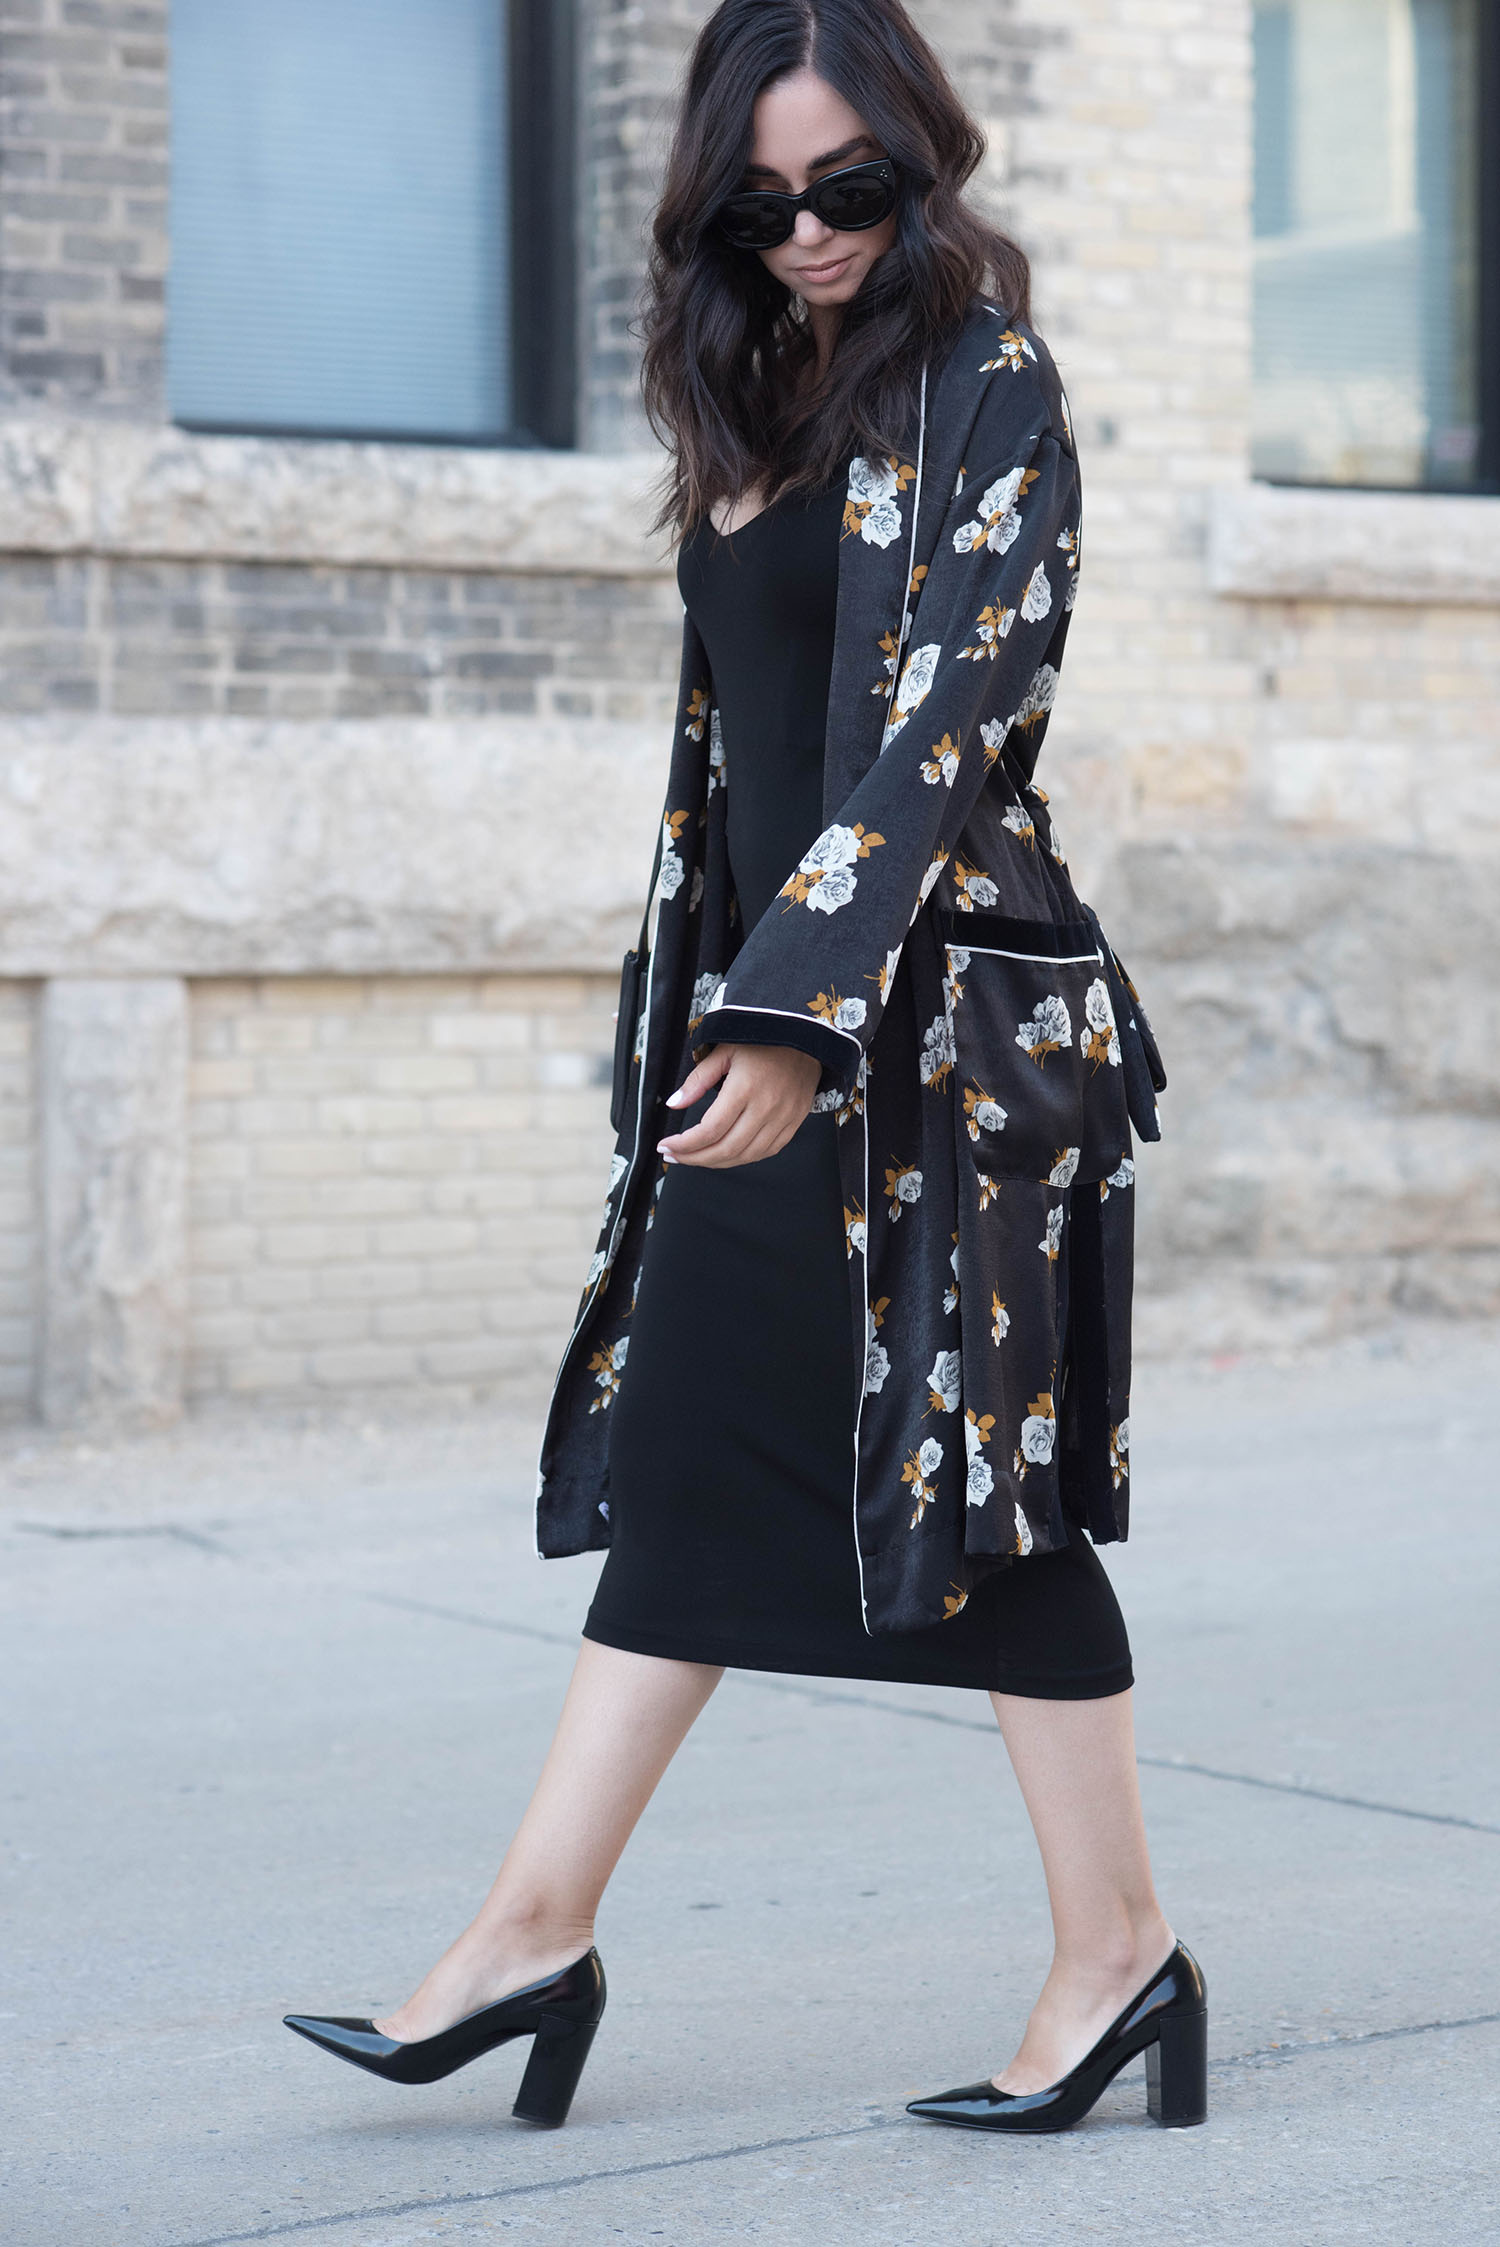 Top fashion blogger Cee Fardoe of Coco & Vera wears a Zara combined kimono and & Other Stories slip dress, with her hair styled by Fran Rizzutto